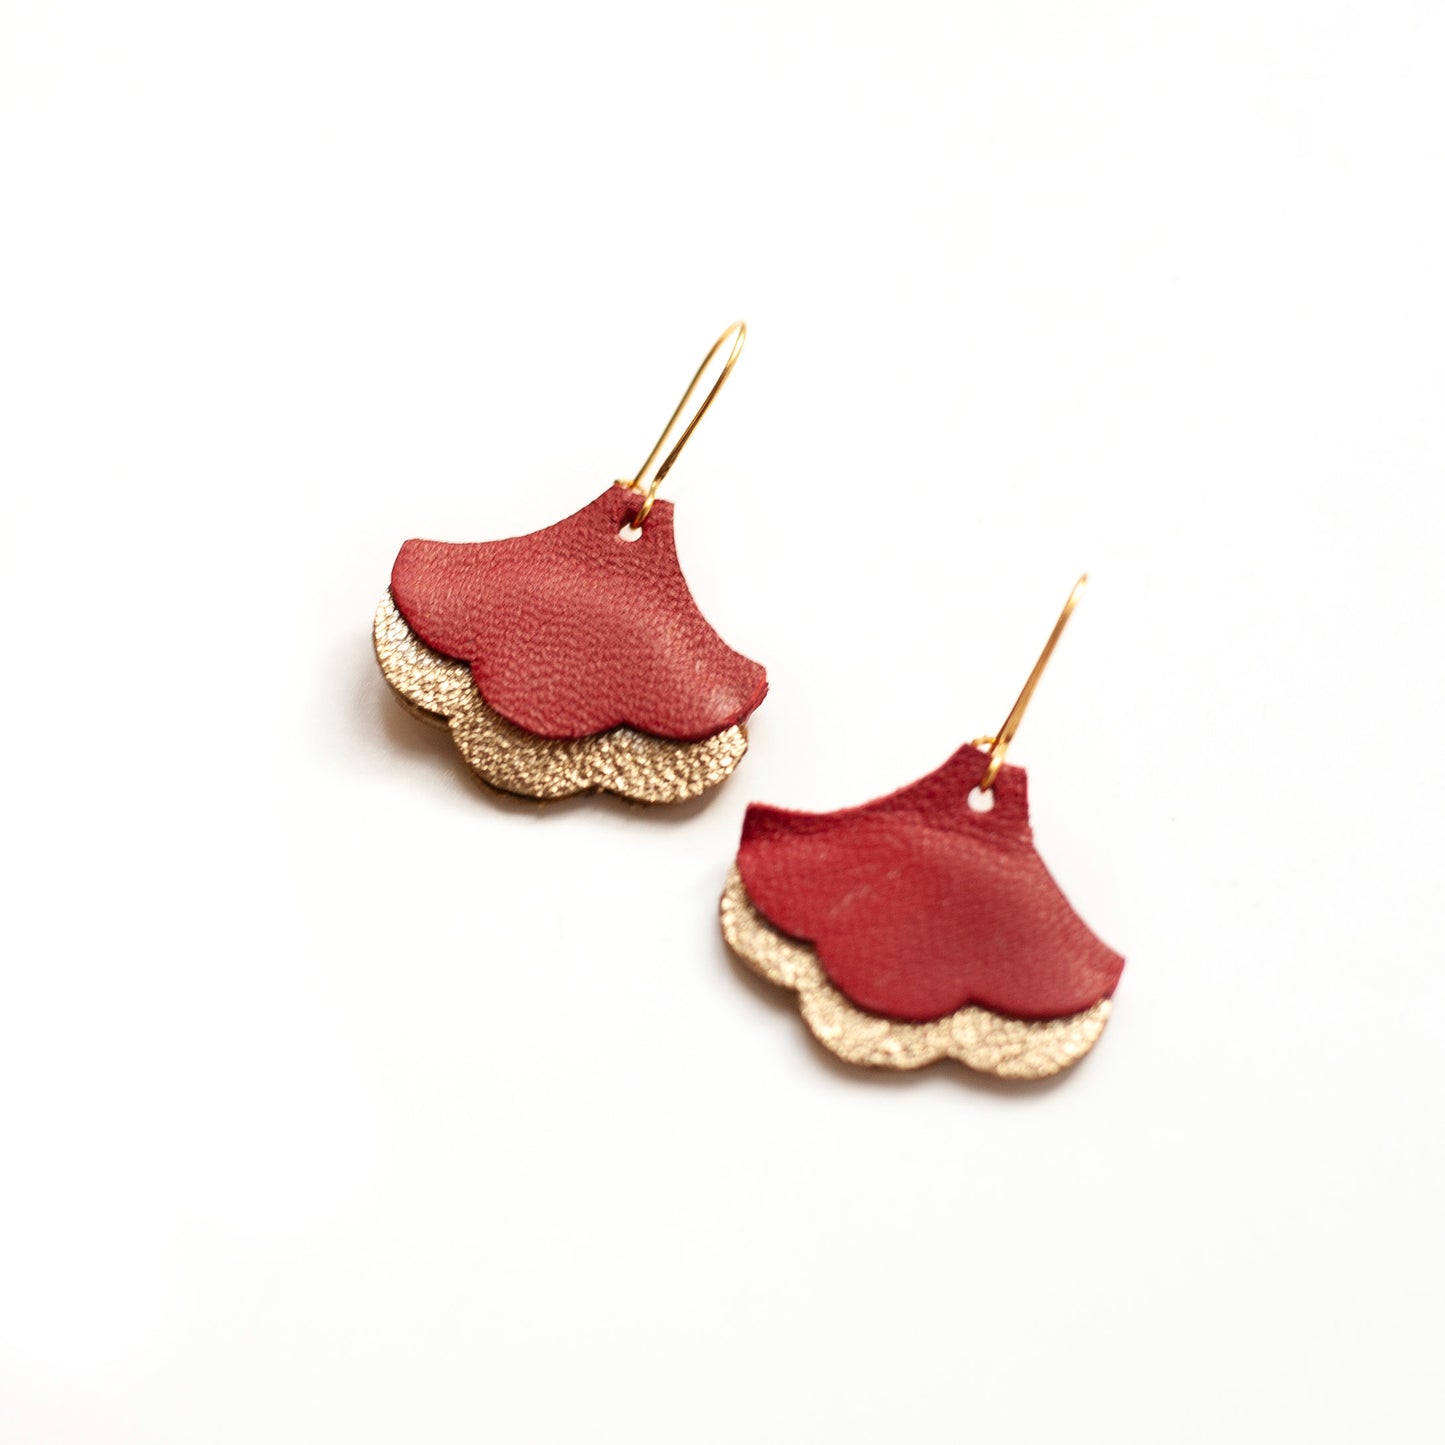 Ginkgo Biloba earrings in dark red and gold leather